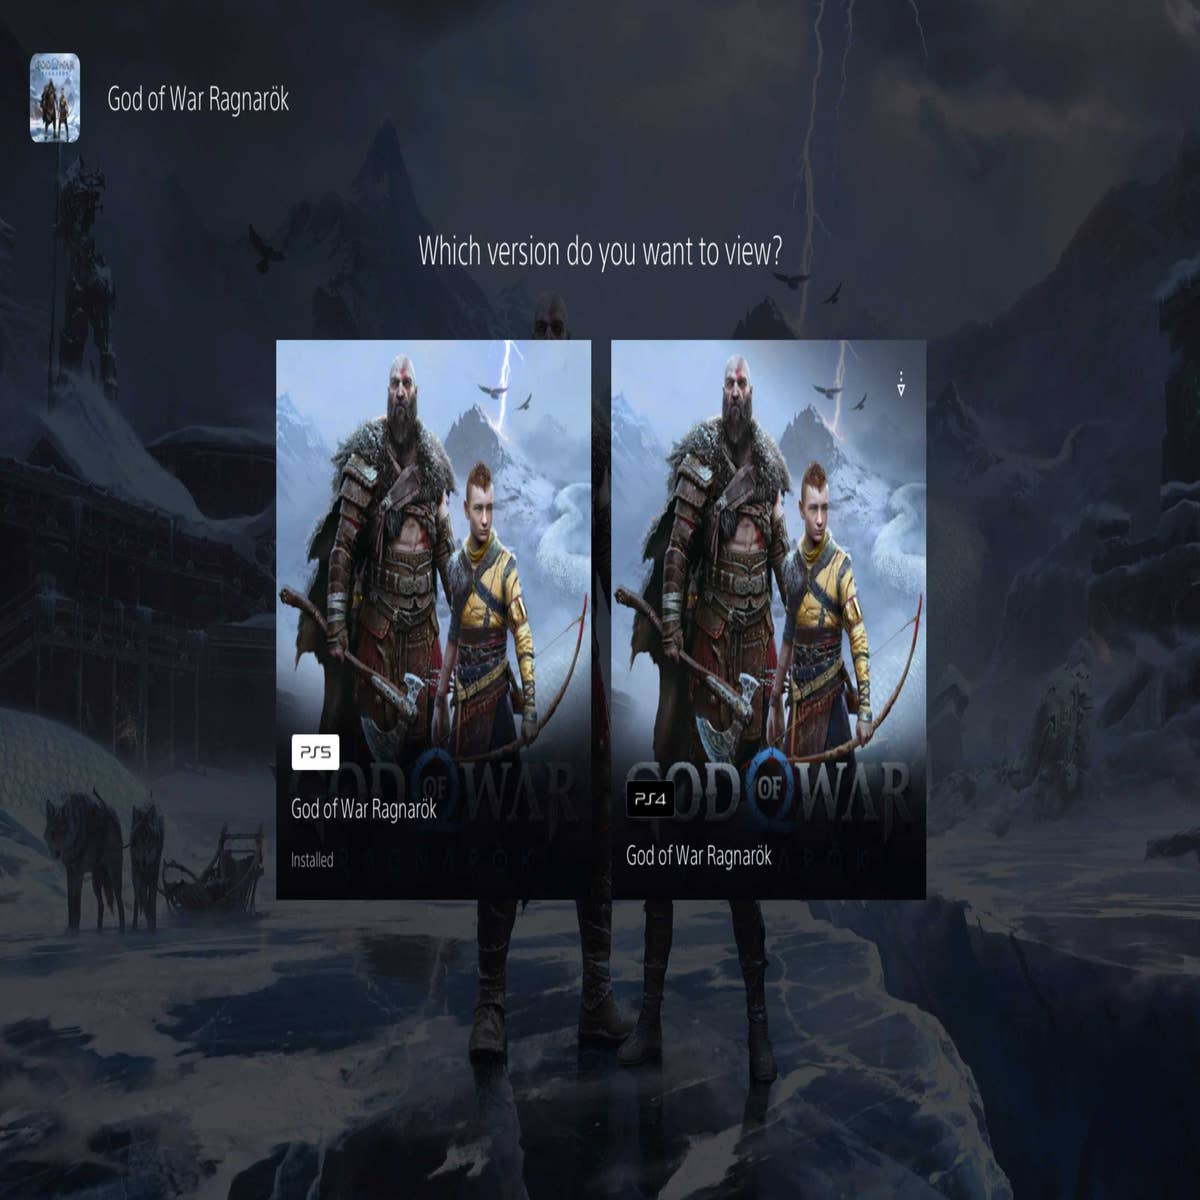 God of War Ragnarok PS Plus Premium Game Trial, Free Online Multiplayer  Weekend Among 'PlayStation Festival of Play' Promotion Perks